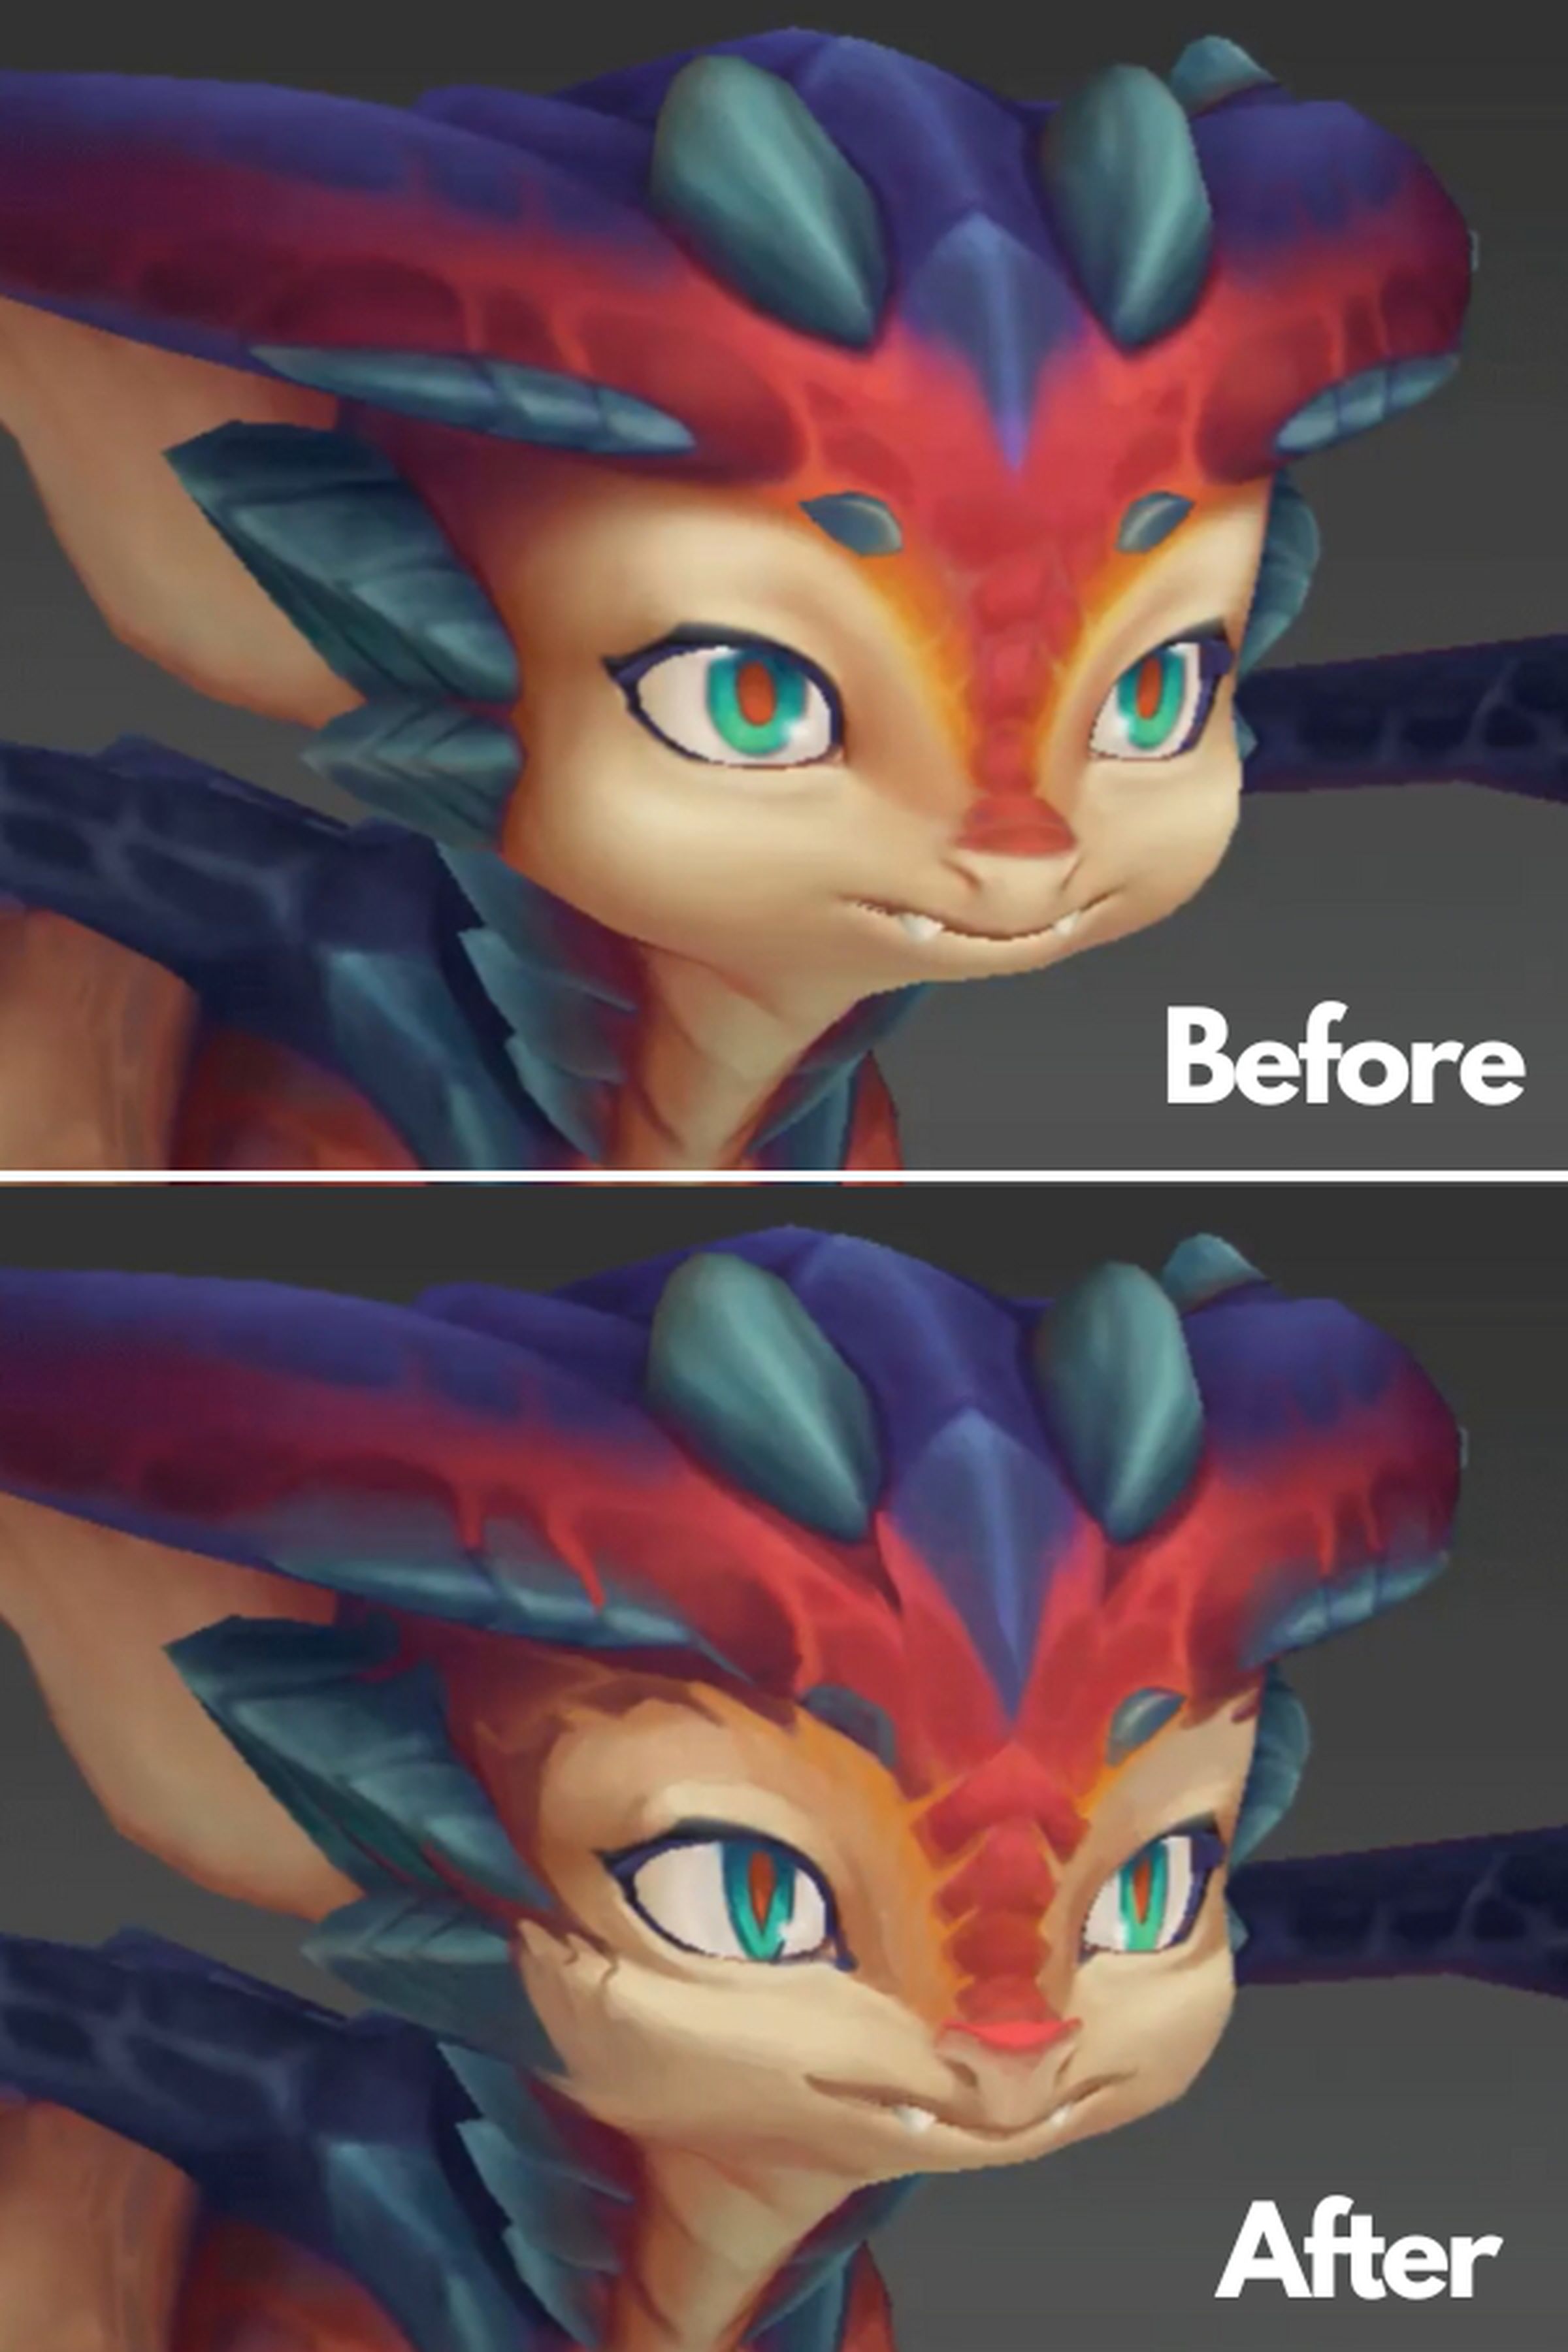 A before and after comparison of Smolder’s redesign from League of Legends.